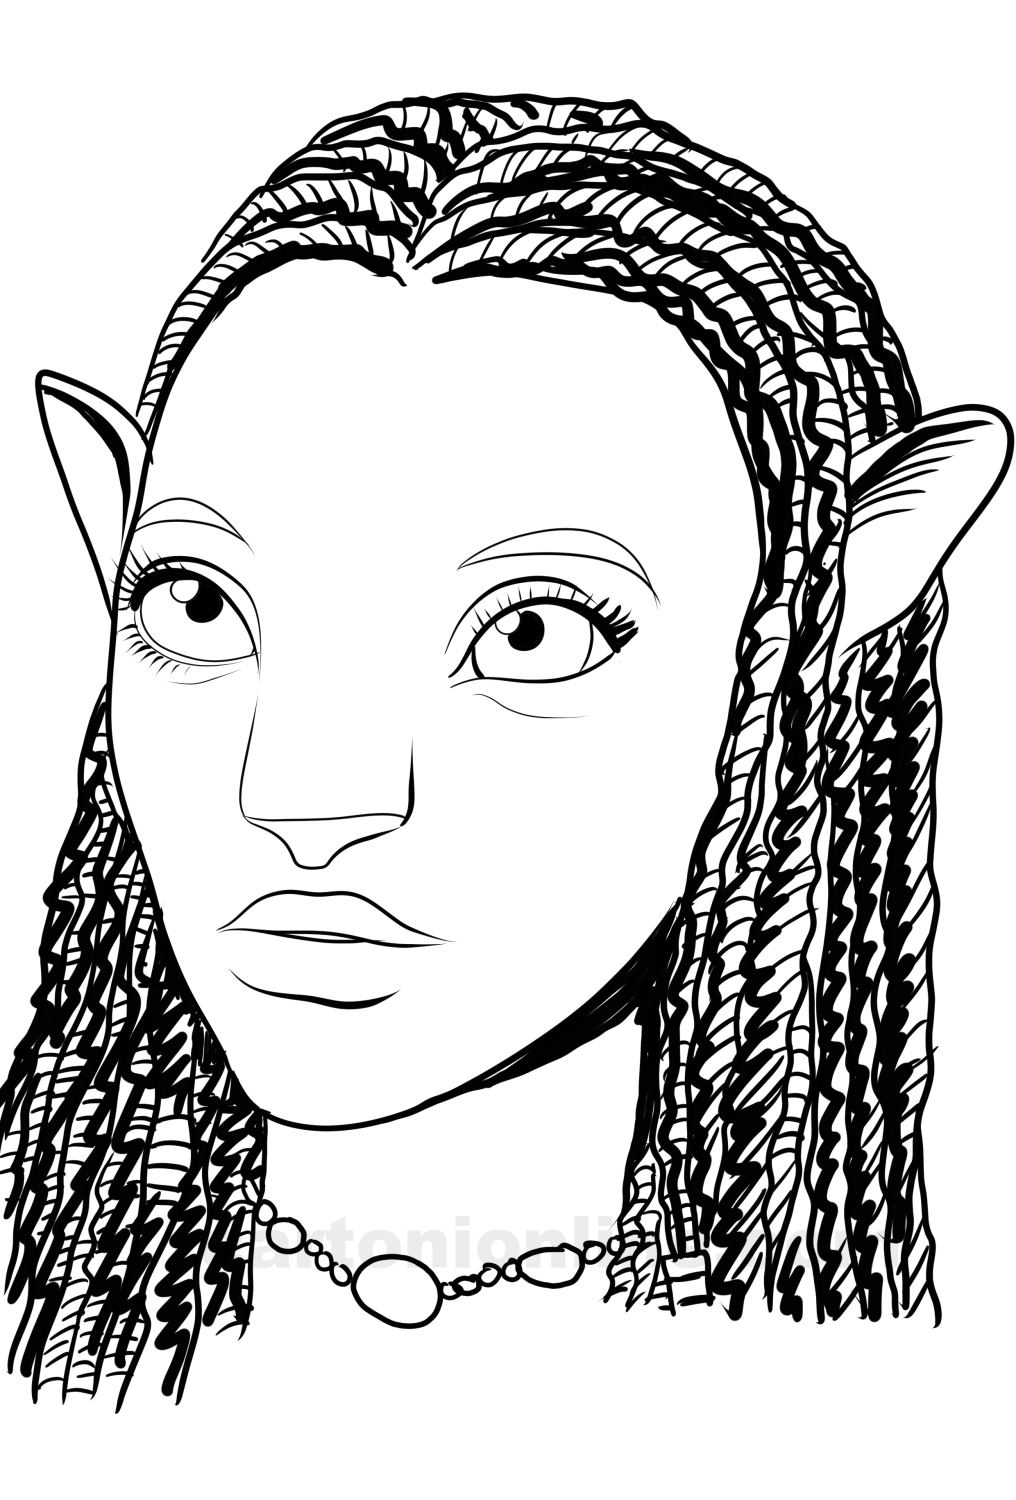 Neytiri - Avatar 2  coloring page to print and coloring